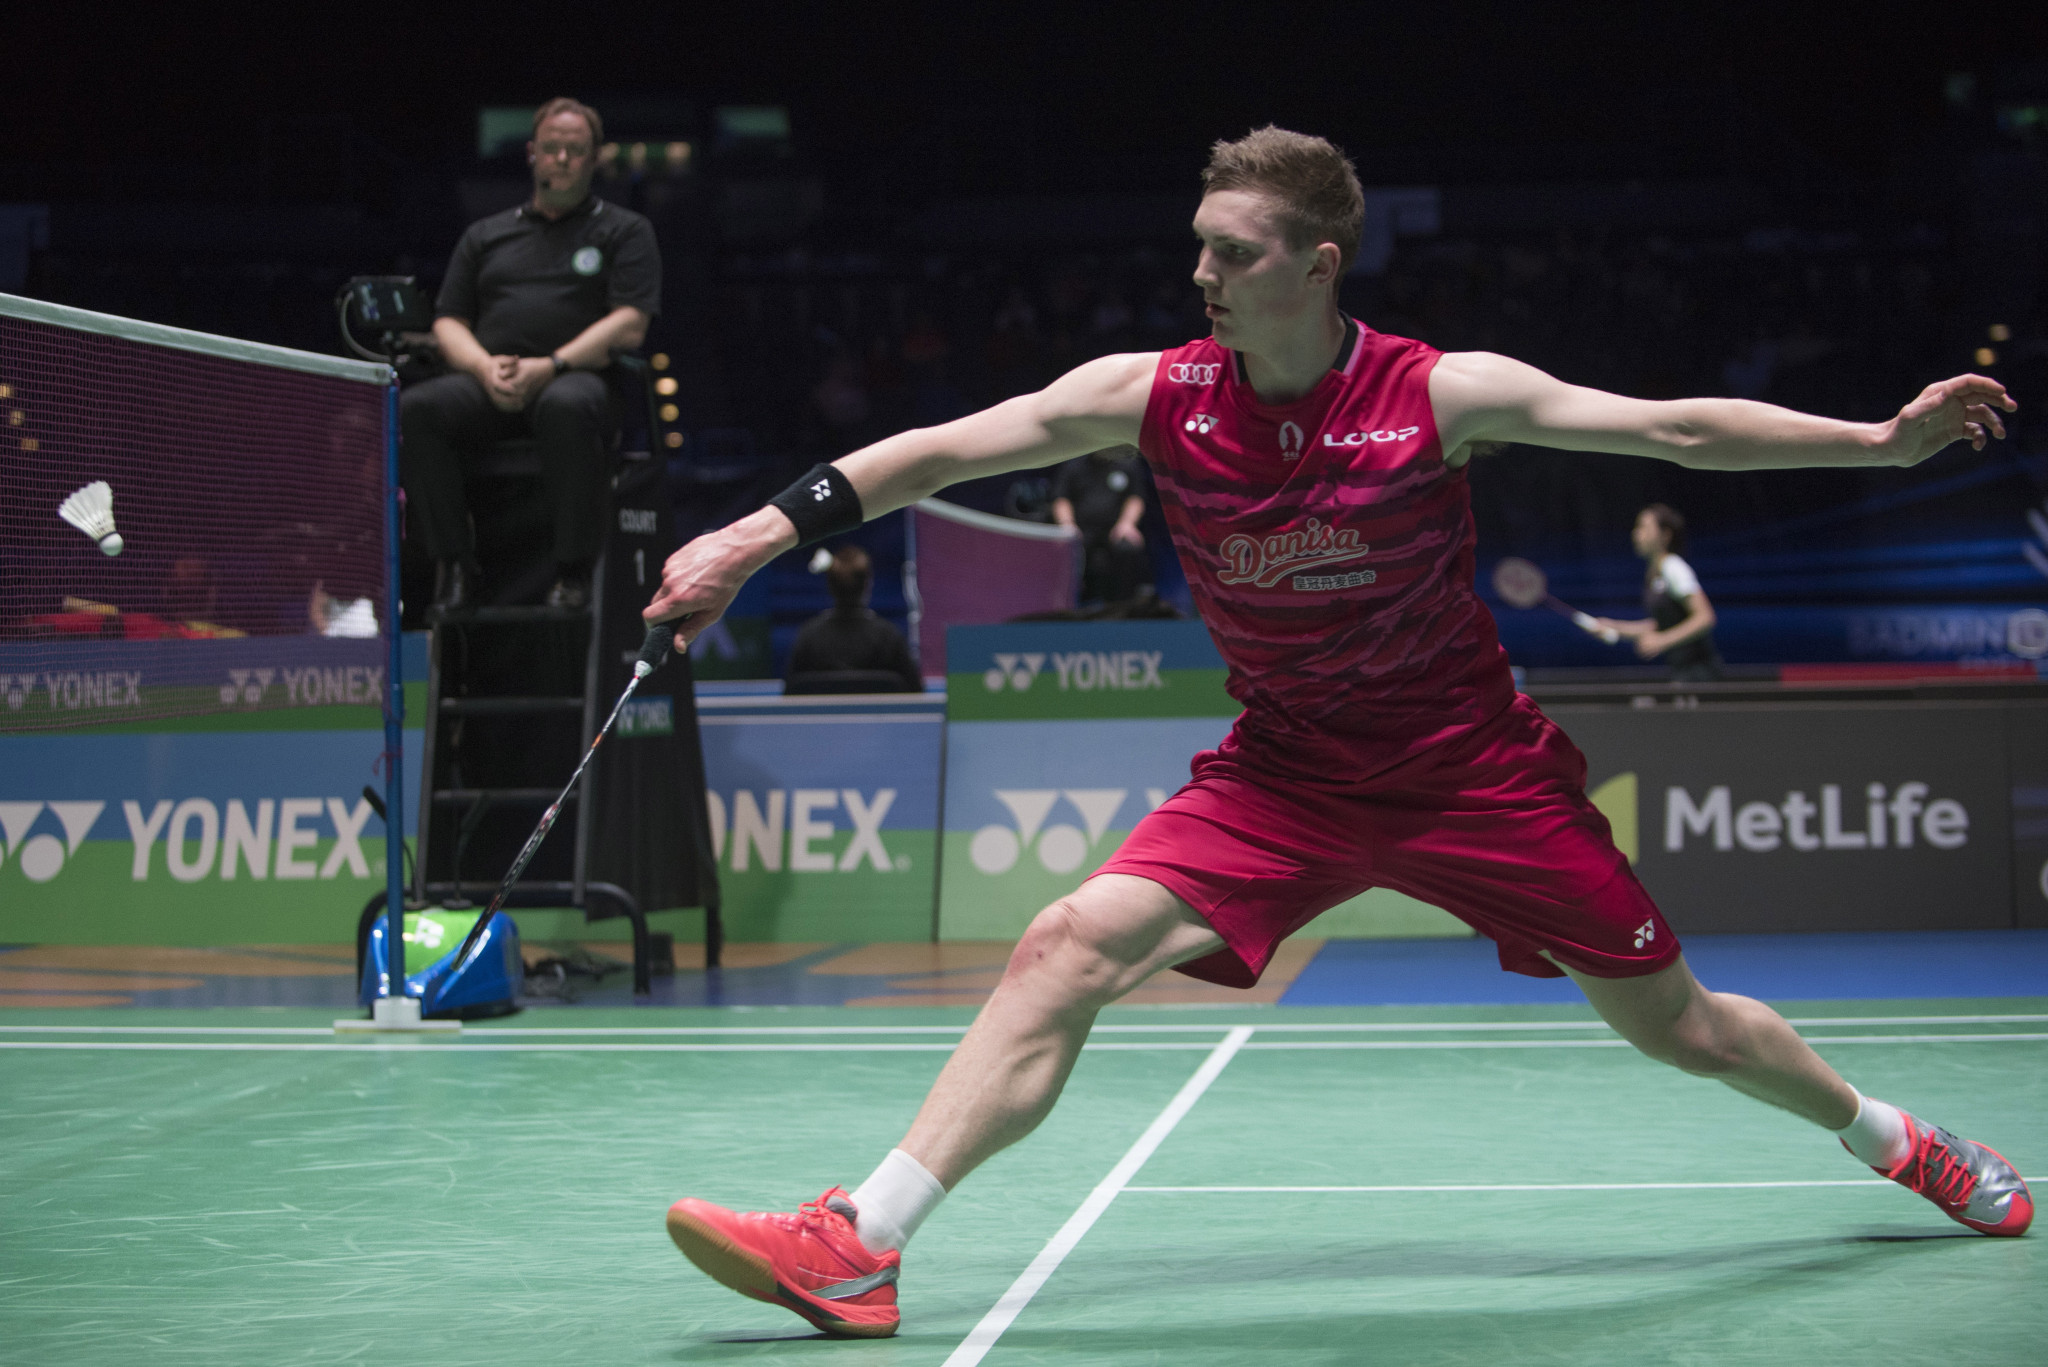 World champion Viktor Axelsen of Denmark is the top seed in the men's singles draw ©Getty Images